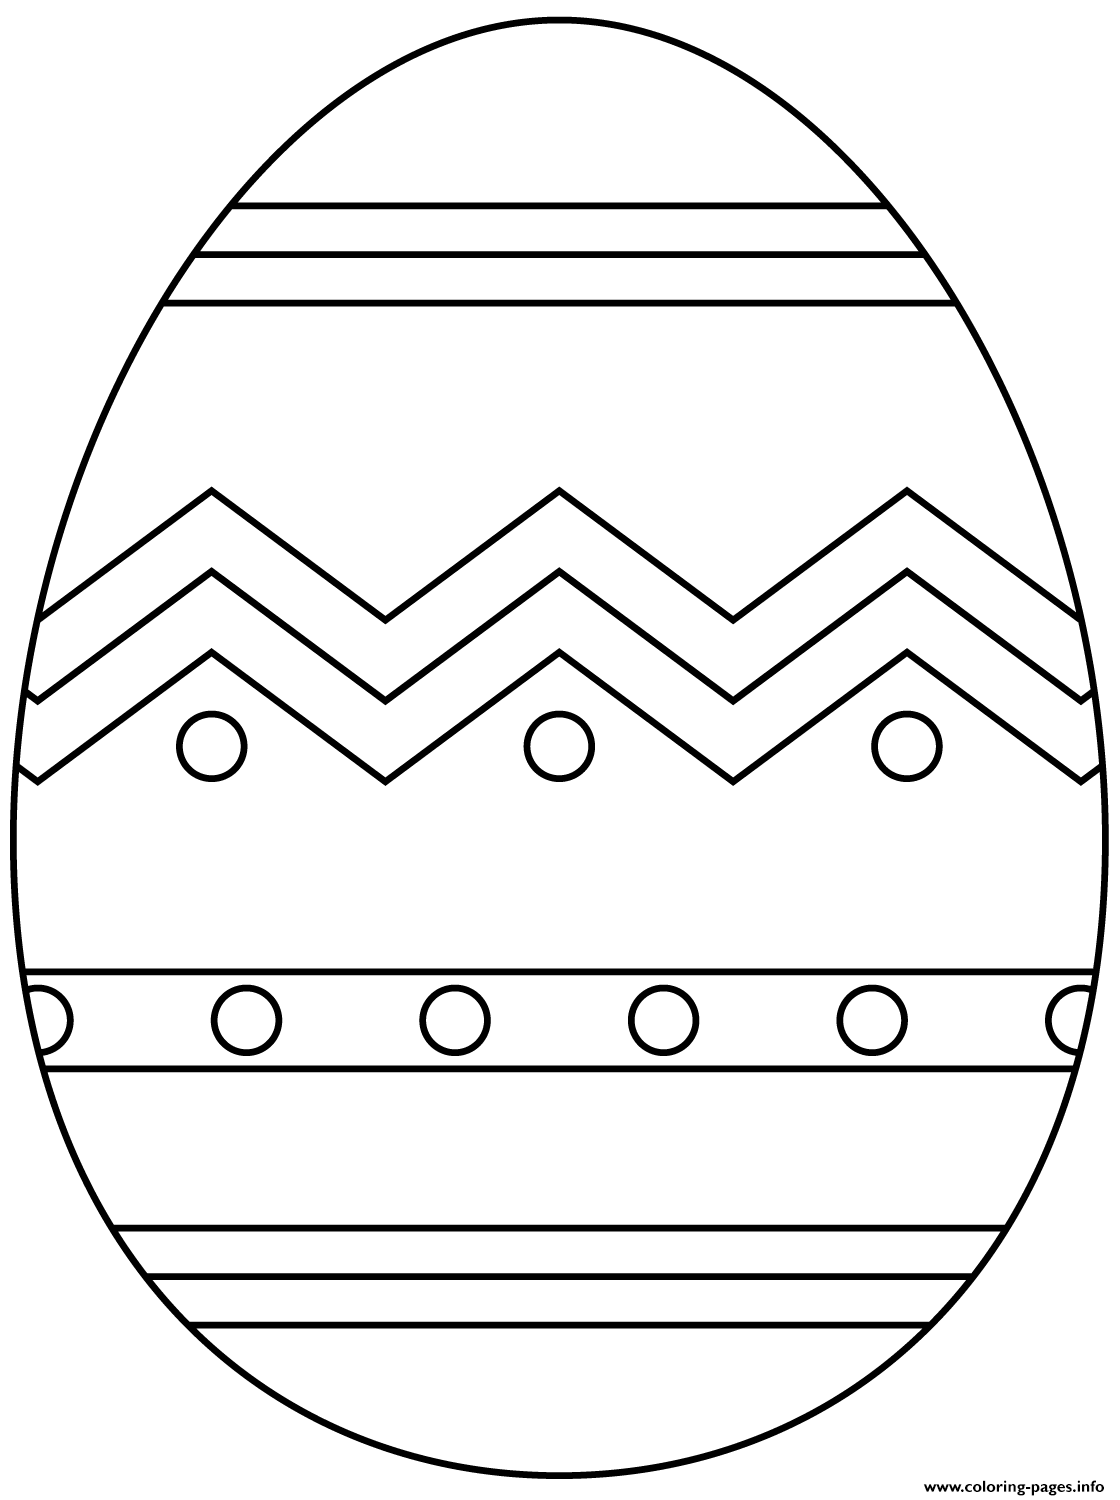 Easter Egg With Abstract Pattern 1 coloring